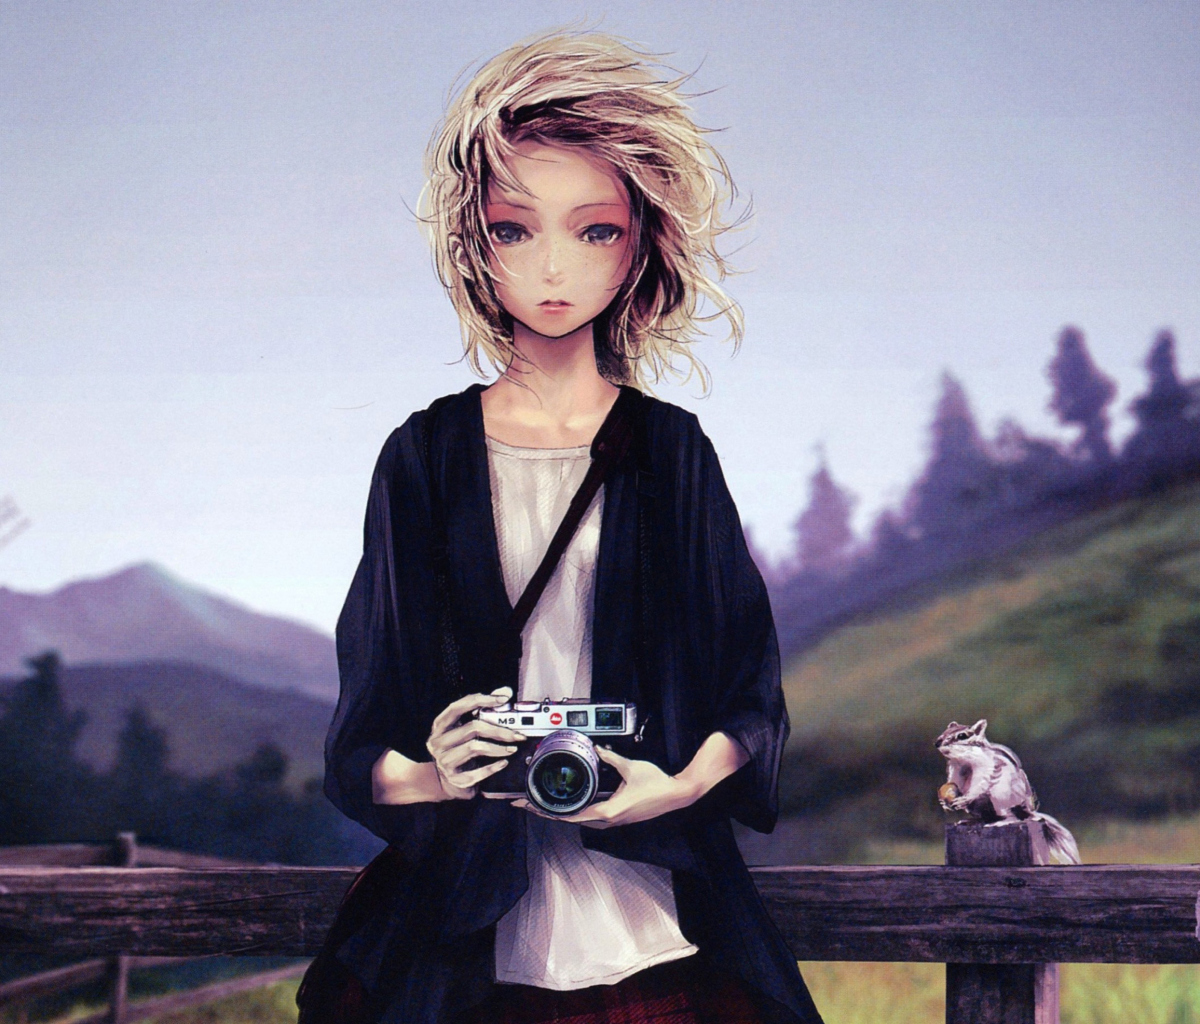 Girl With Photo Camera wallpaper 1200x1024